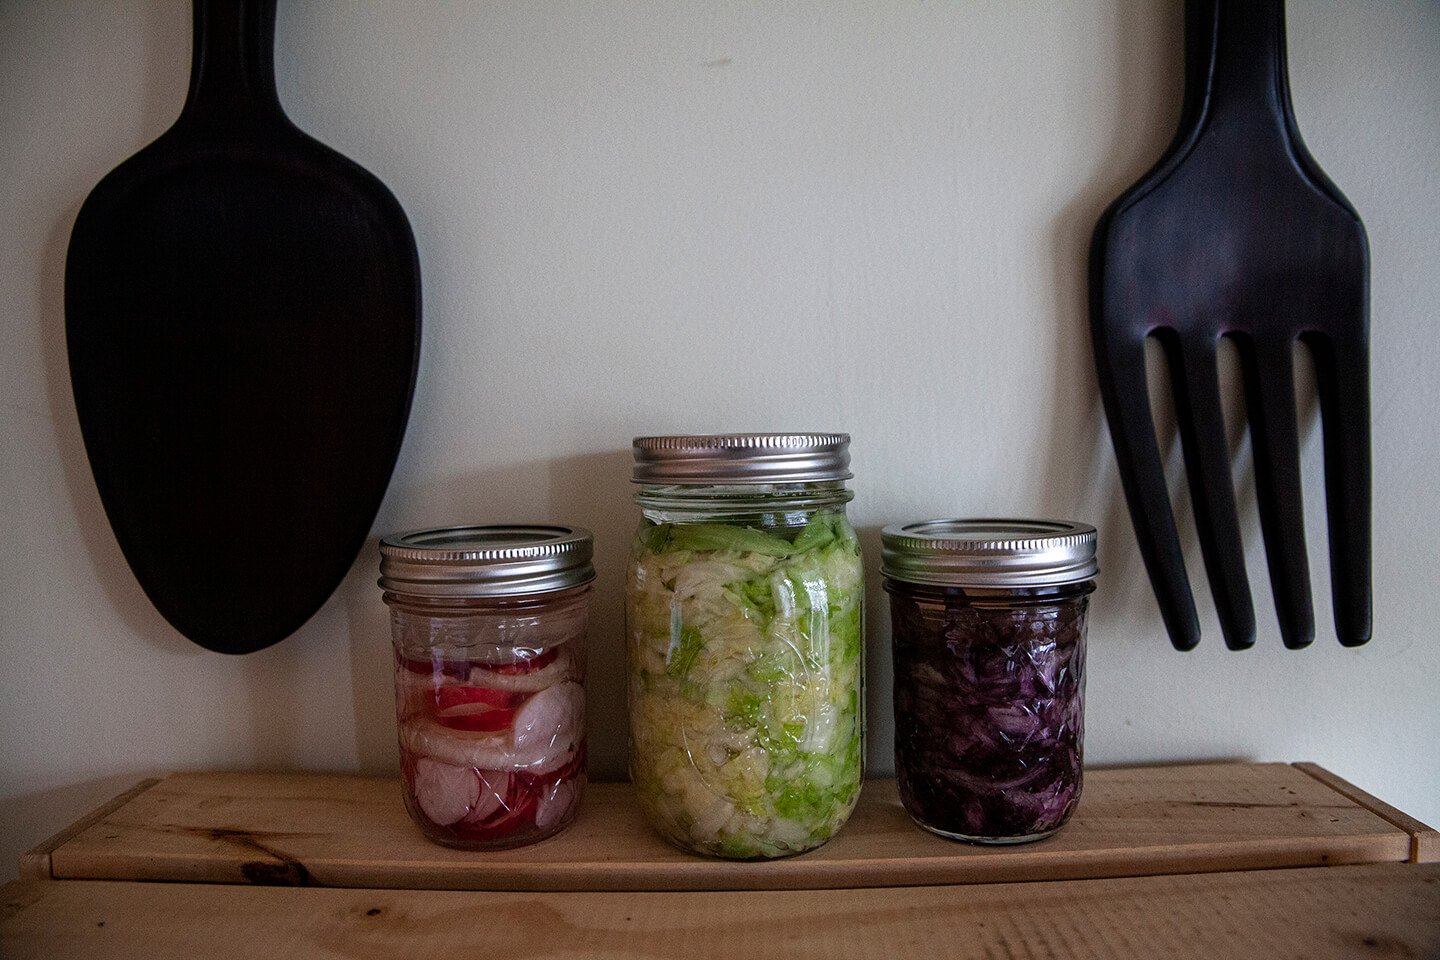 Three glass jars holding fermented radishes, red cabbage and green cabbage.